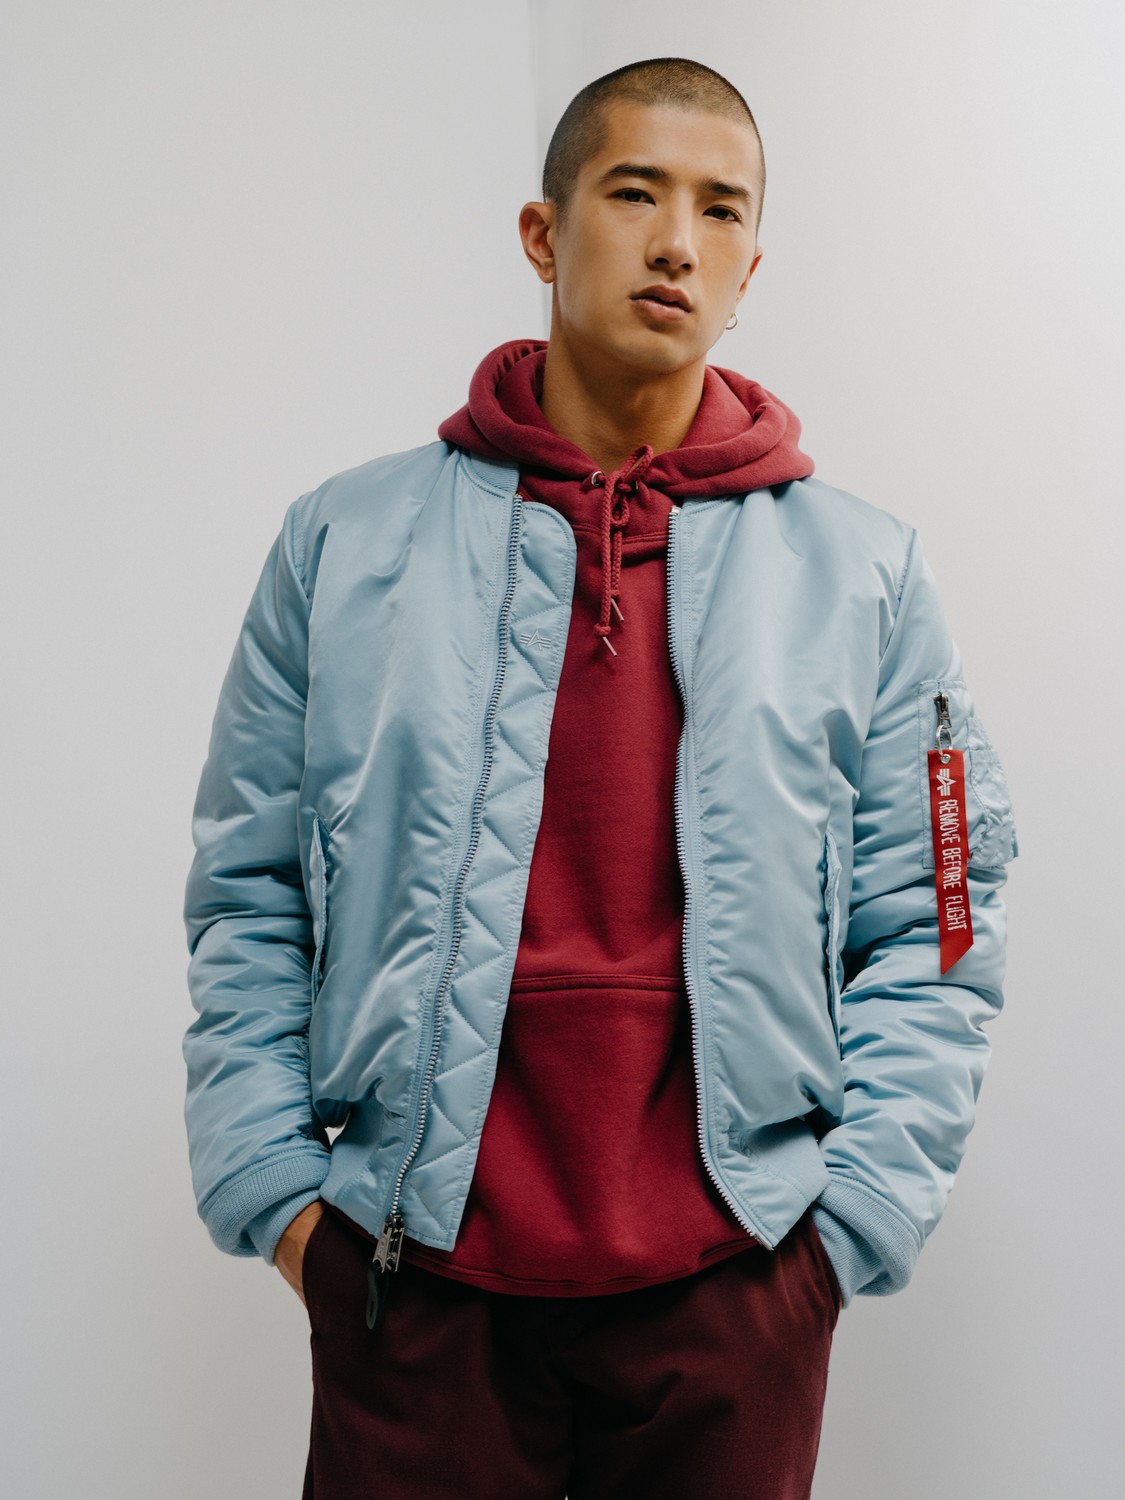 Urban Outfitters And Alpha Industries Announce Bomber Project Featuring ...